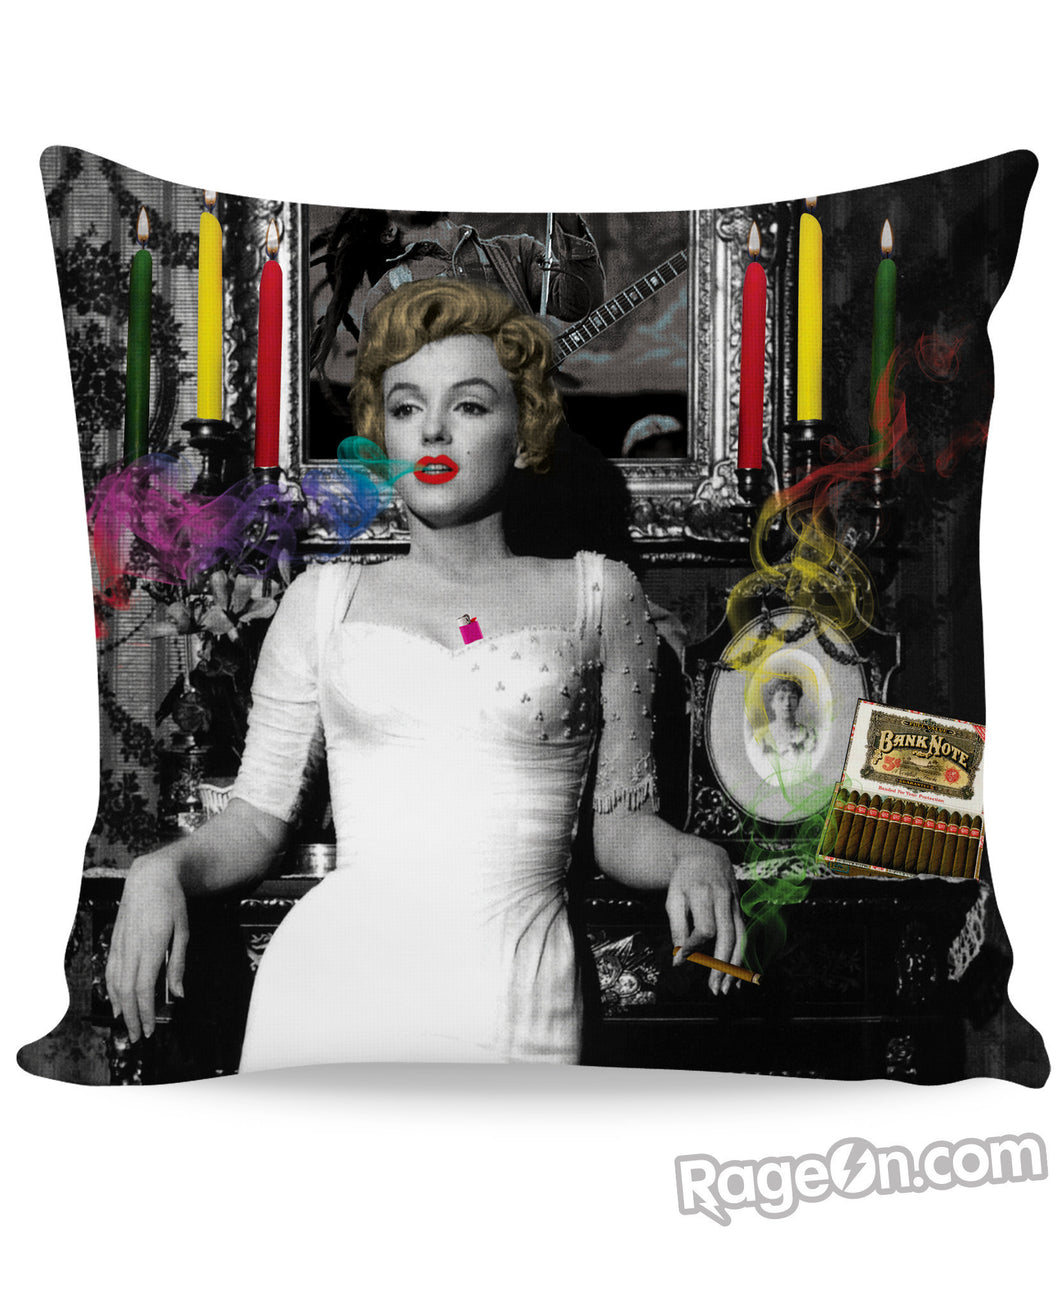 Marilyn Smoking Couch Pillow